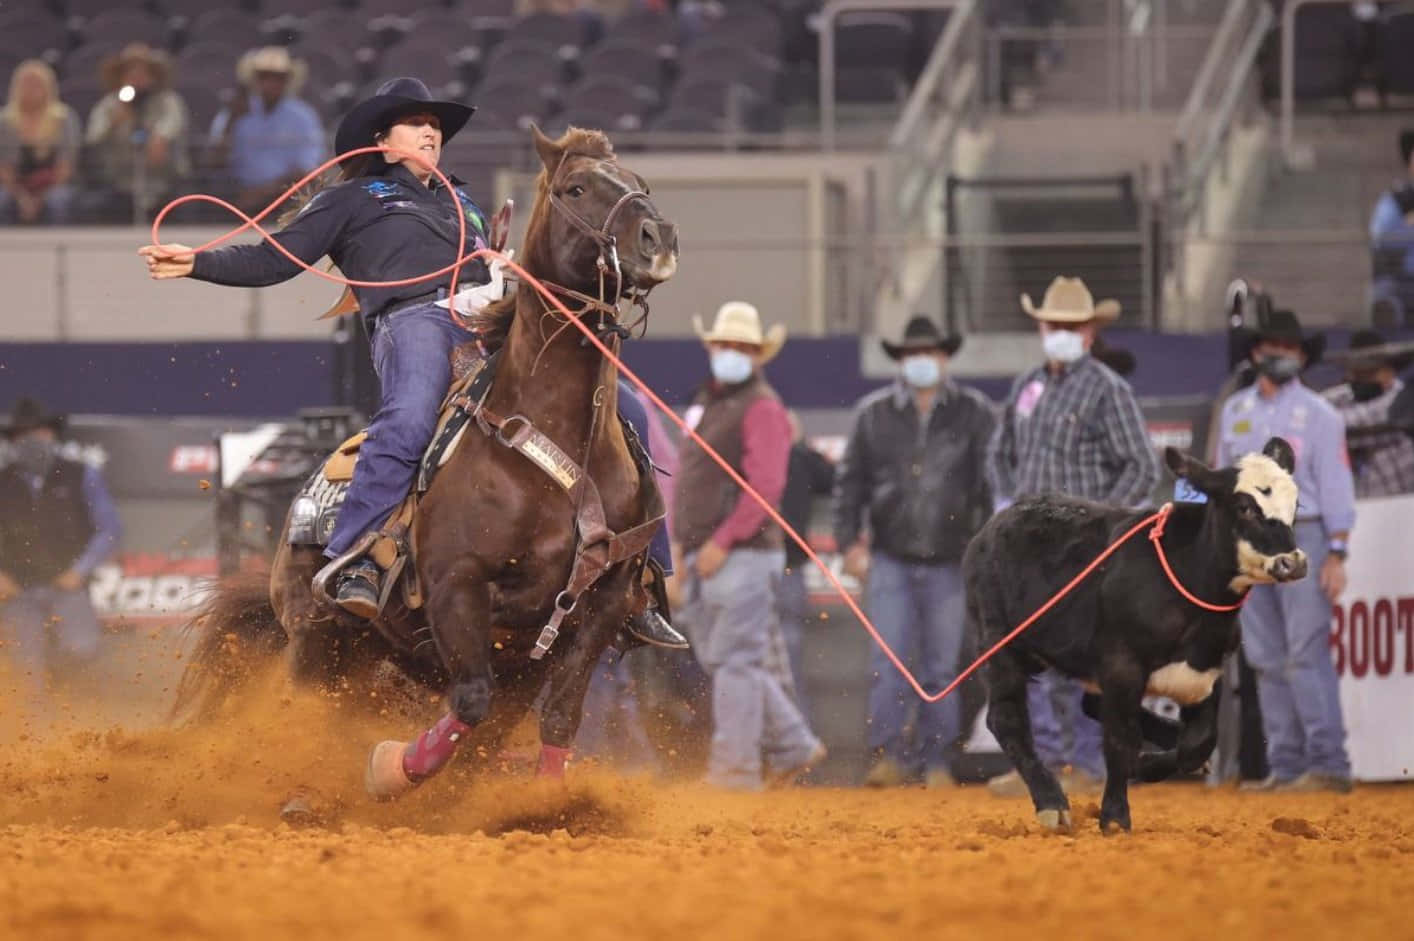 Professional cowboys competing in the annual rodeo